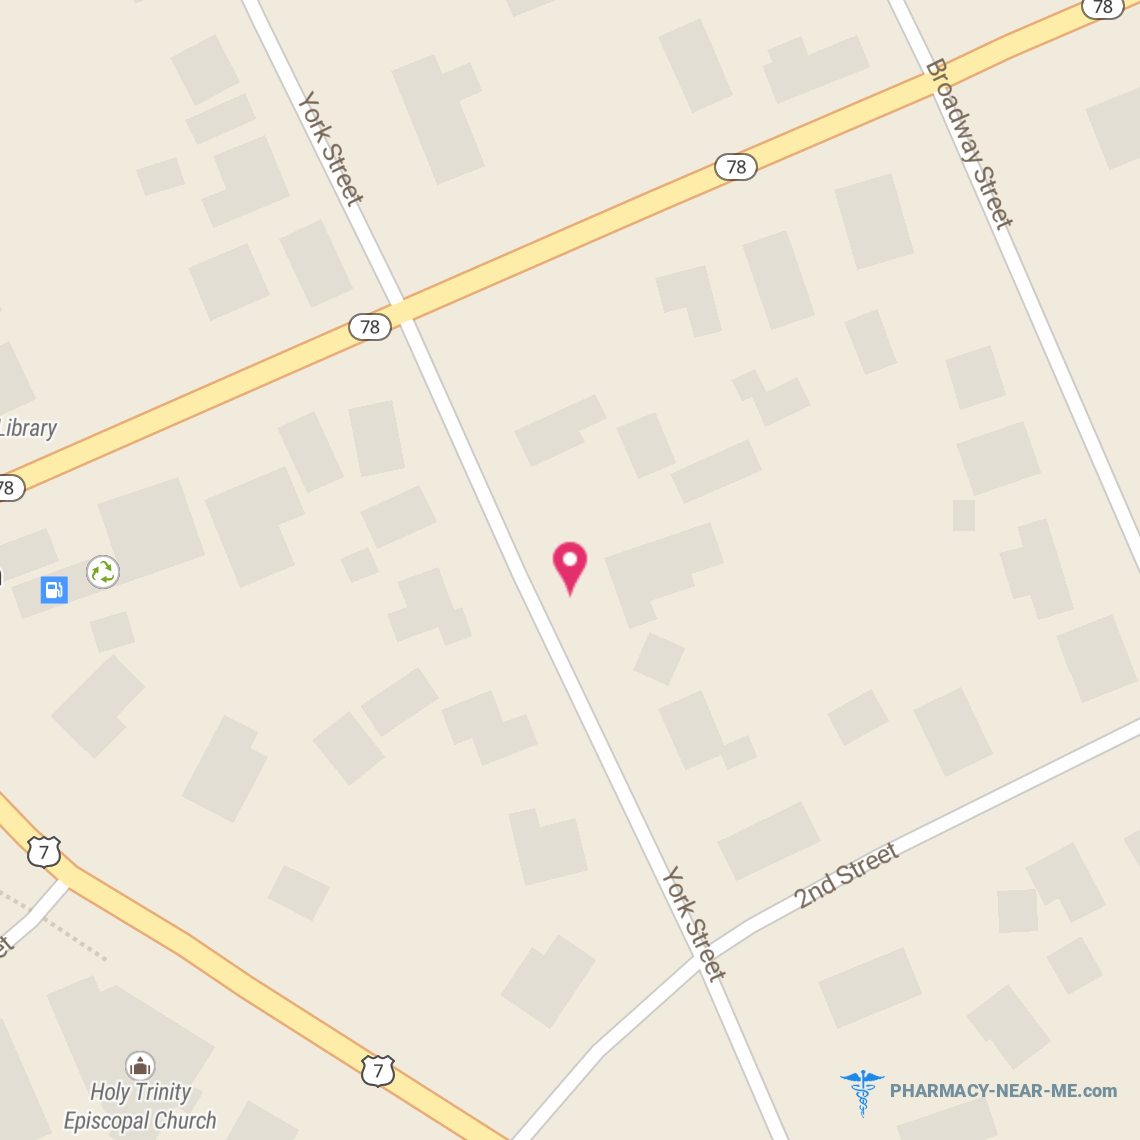 SWANTON REXALL - Pharmacy Hours, Phone, Reviews & Information: 13 York Street, Swanton, Vermont 05488, United States